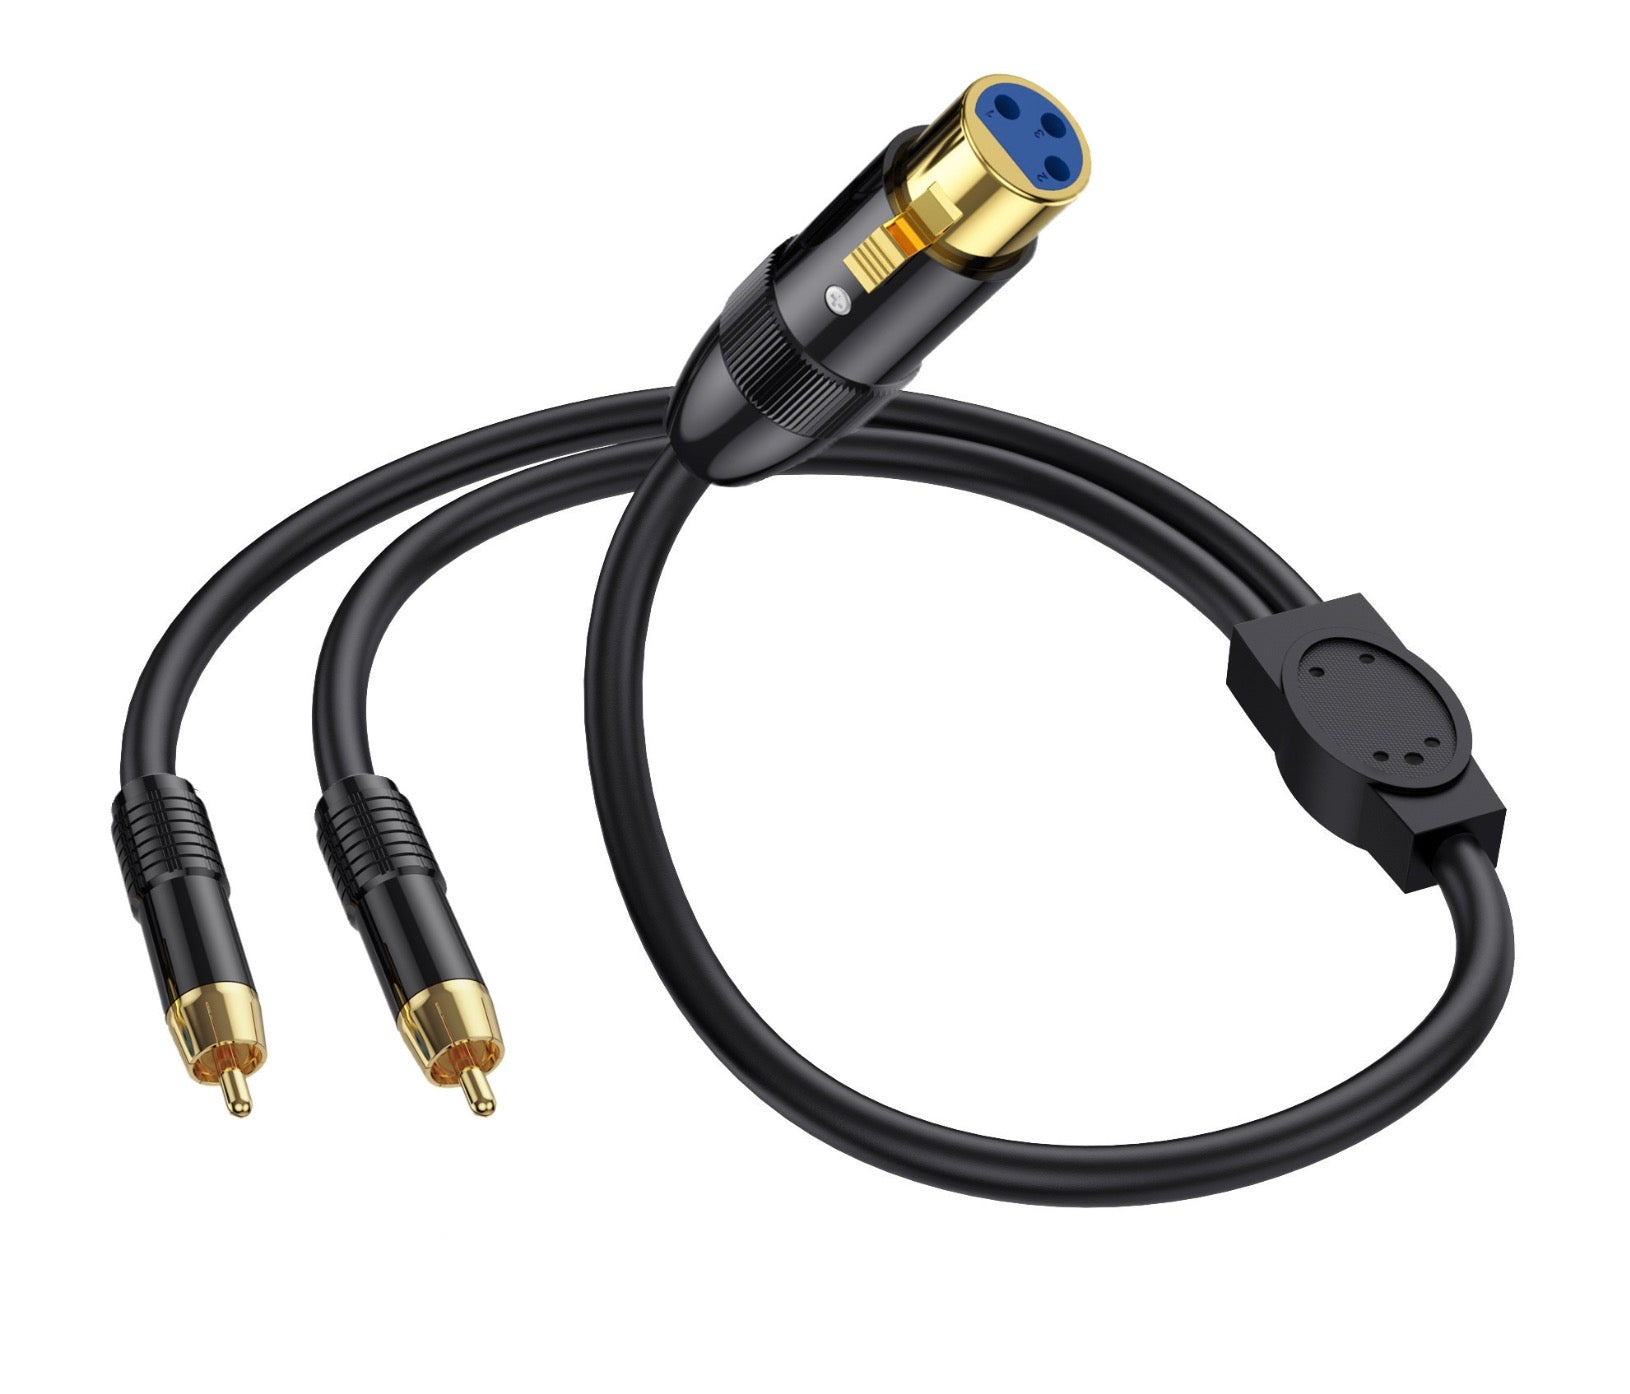 XLR to 2 x Phono RCA Y Splitter Patch Cable, XLR 3Pin Female to Dual RCA Male Plug Stereo Audio Extension Cable